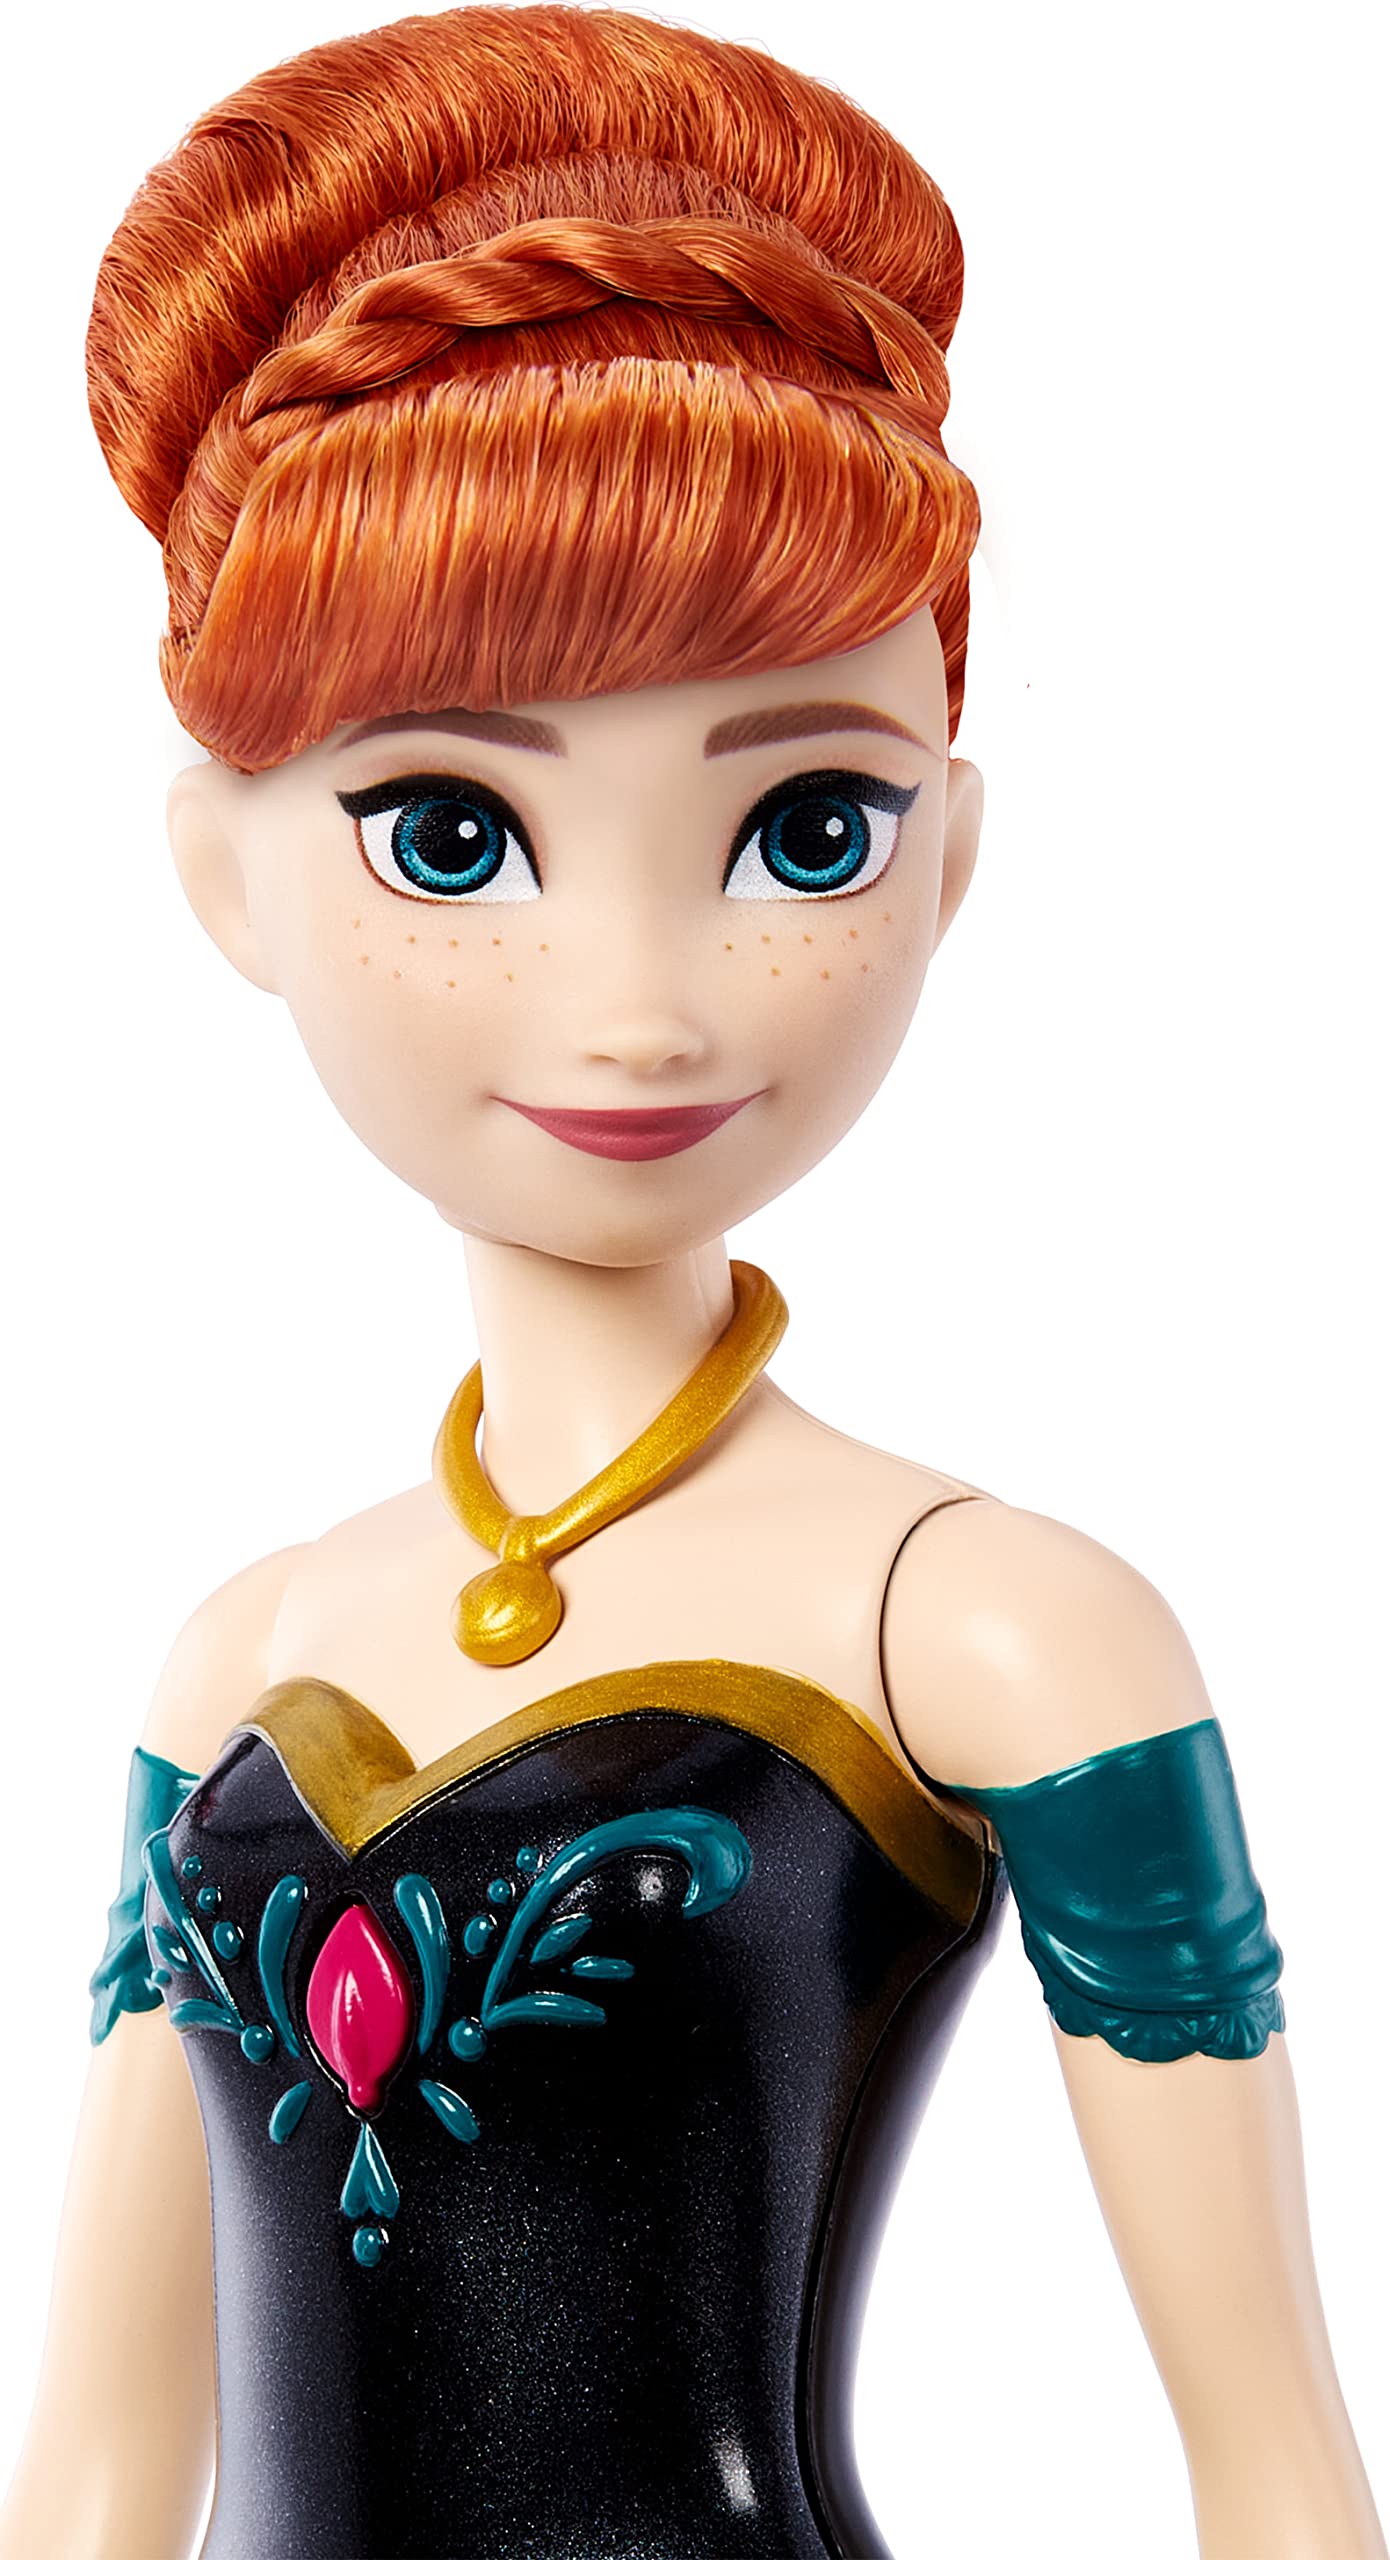 Disney Frozen Toys, Singing Anna Doll in Signature Clothing, Sings “For the First Time in Forever” from the Disney Movie Frozen